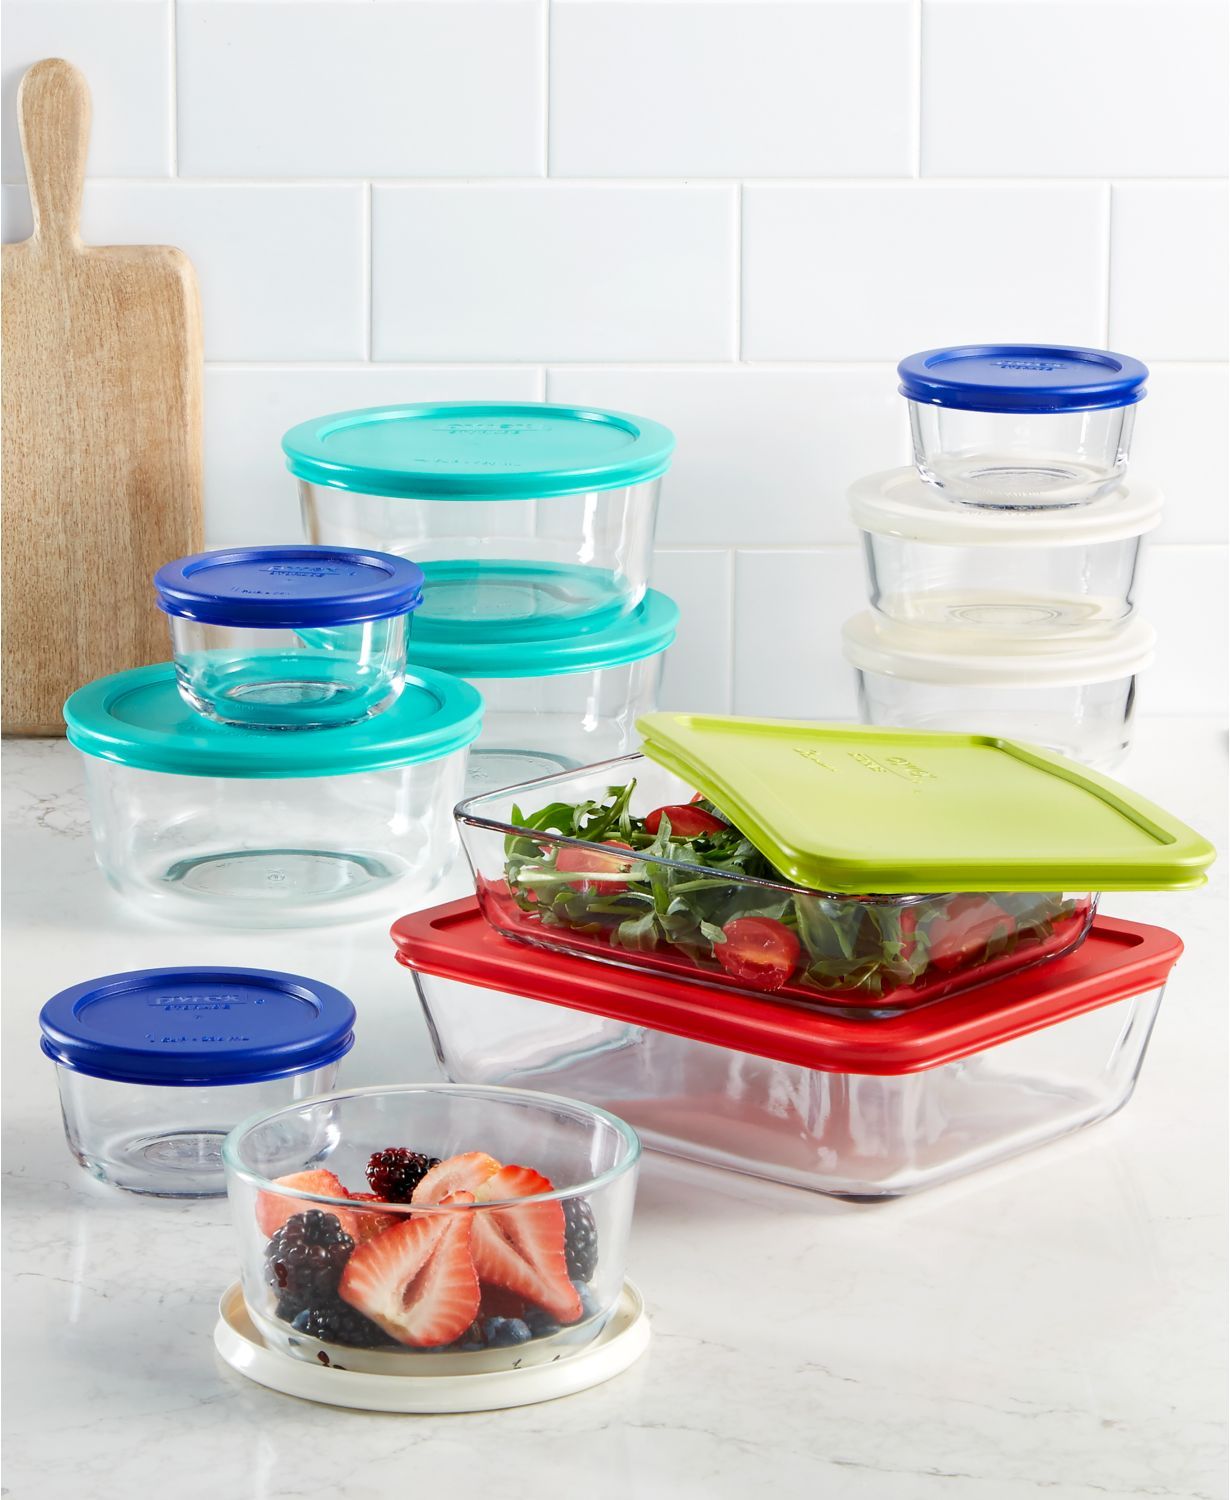 Set of 3 Food Storage Home Kitchen Lunch Box Round Containers MULTI BOX 